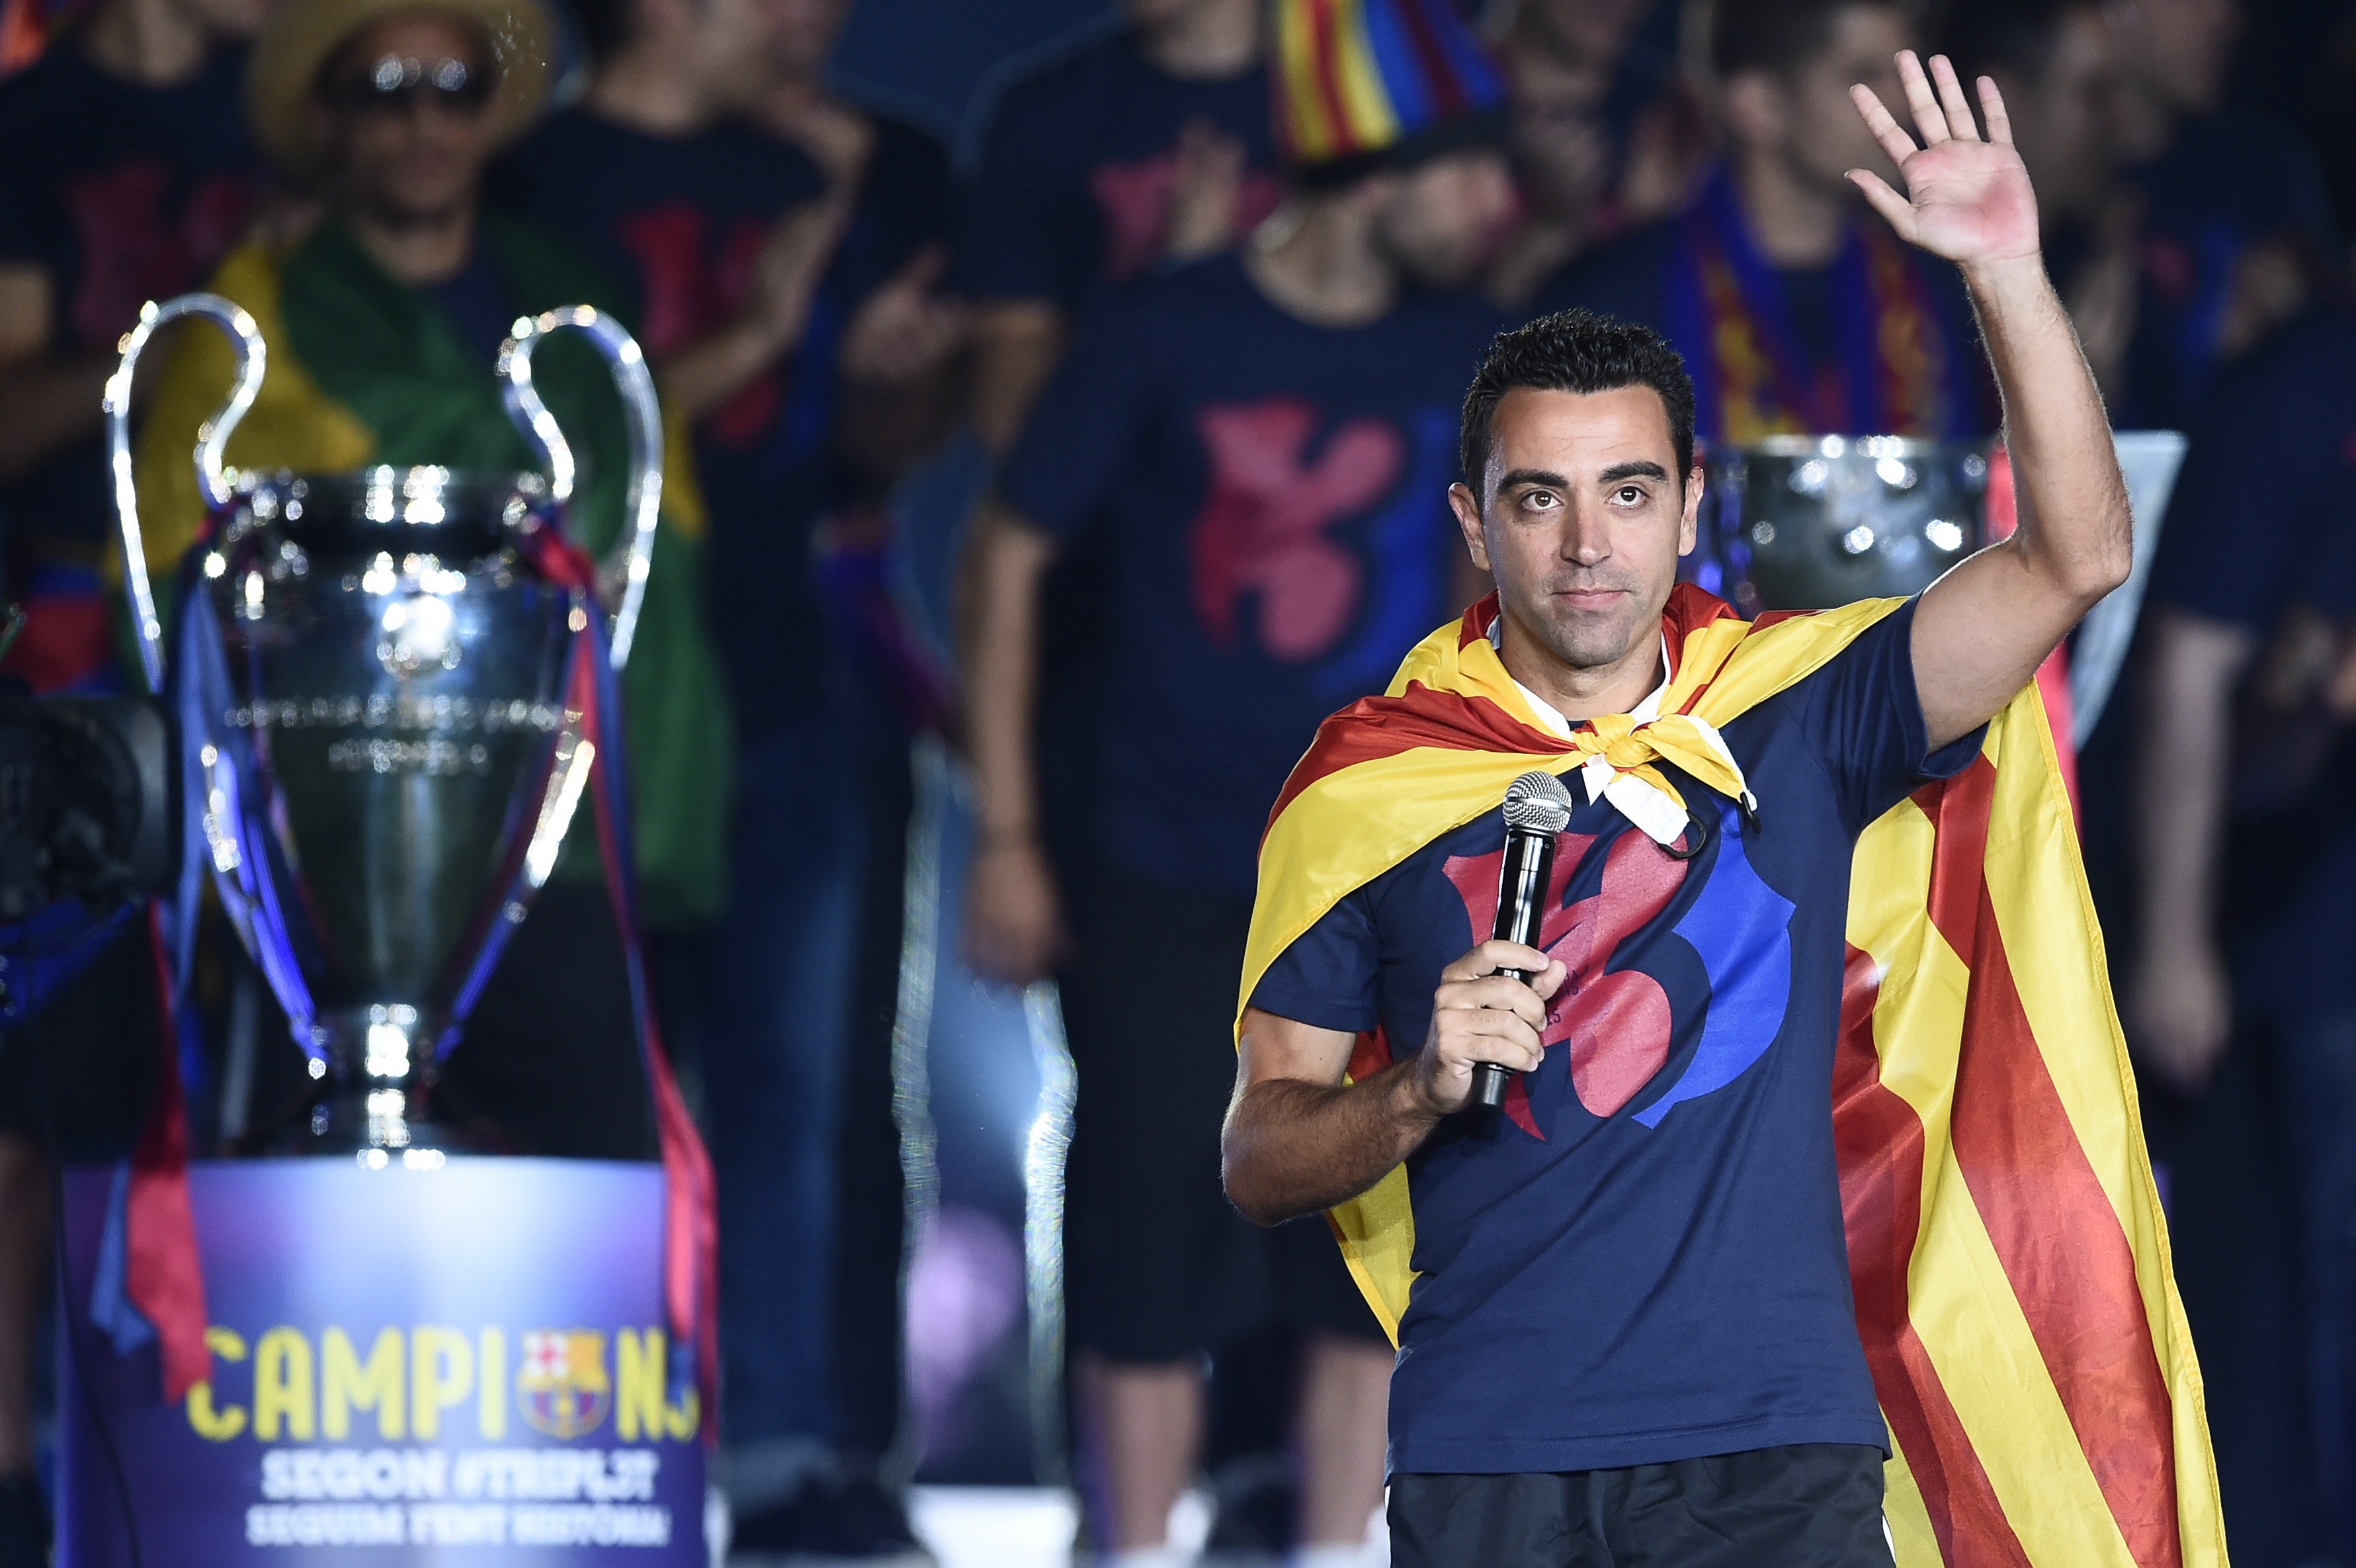 Barcelona's midfielder Xavi Hernandez waves as he takes part in the celebrations held for their victory over Juventus, one day after the UEFA Champions League final football, at the Camp Nou stadium in Barcelona on June 7, 2015. Luis Suarez and Neymar scored second-half goals to give Barcelona a 3-1 Champions League final victory over Juventus on June 6, 2015 as the Spaniards became the first team to twice win the European treble.   AFP PHOTO/ JOSEP LAGO        (Photo credit should read JOSEP LAGO/AFP/Getty Images)